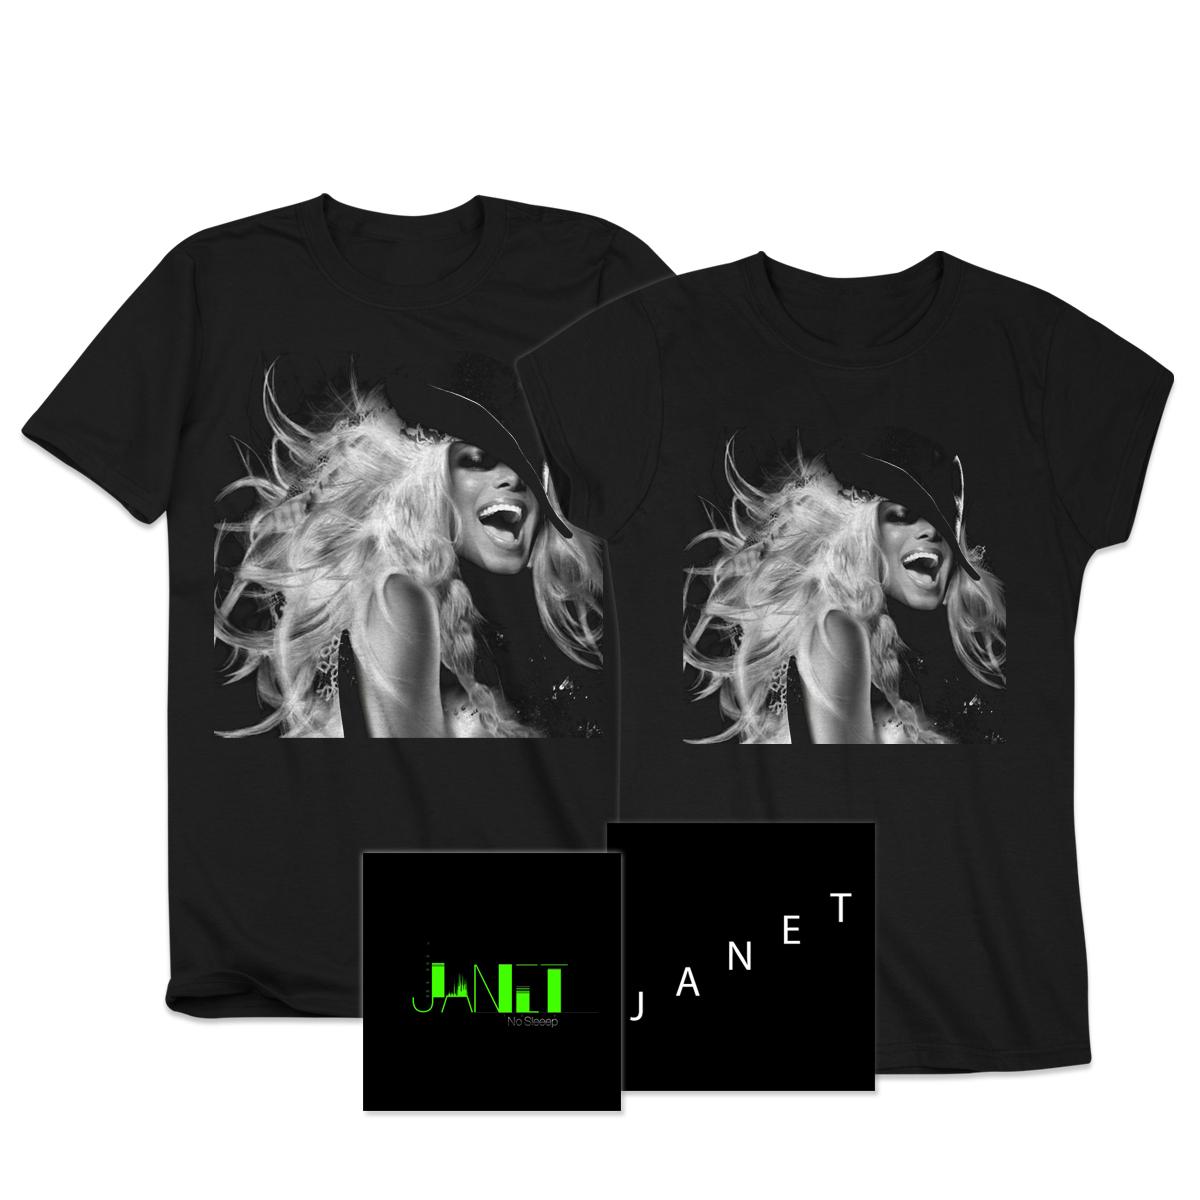 New shows added to JANET's Unbreakable Tour! Preorder JANET's album for presale access! http://t.co/EnVn4CF7MV http://t.co/0tq6CeOrFa